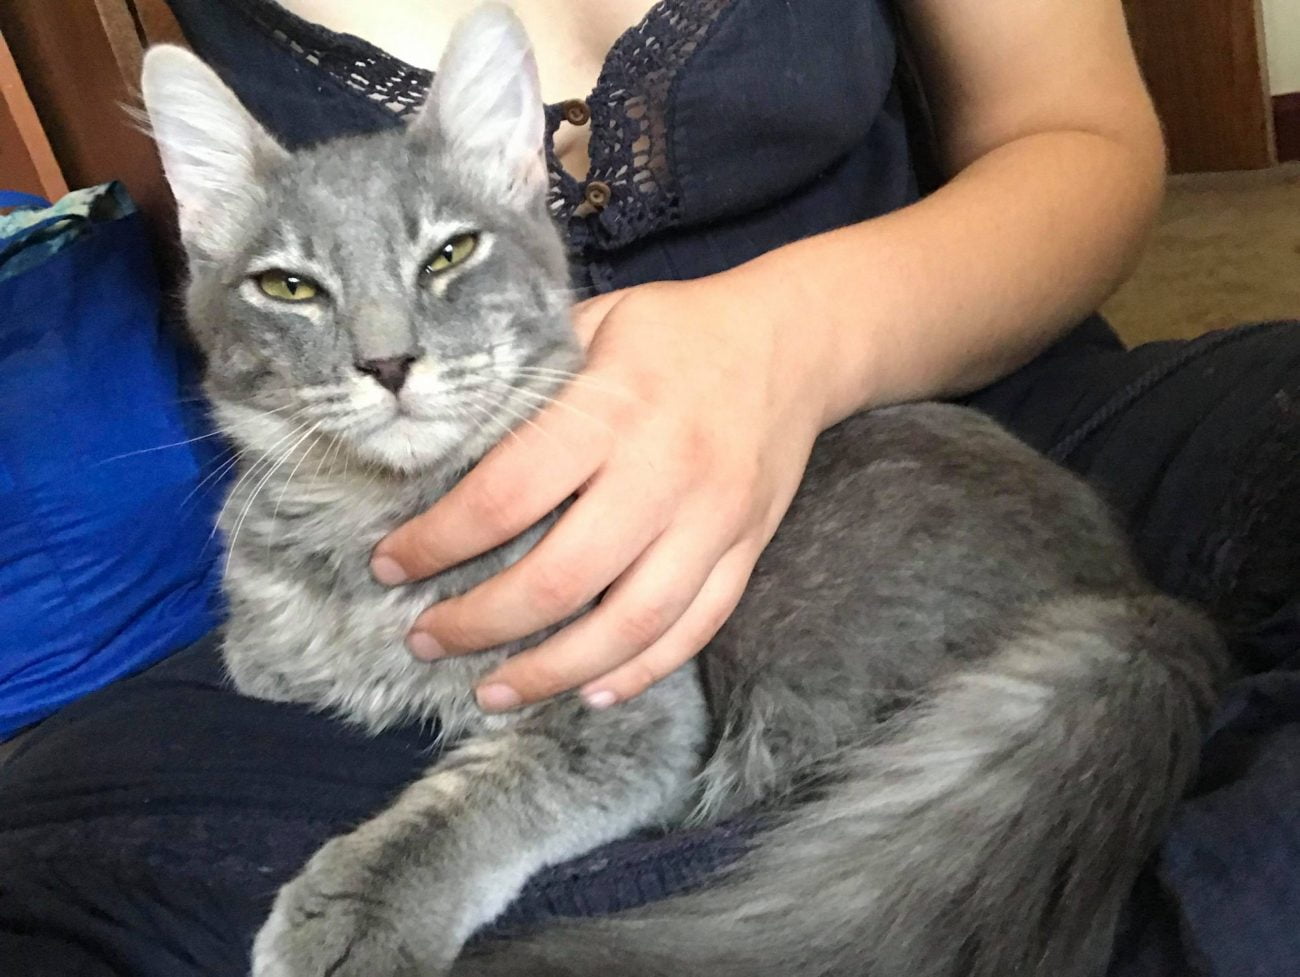 Handsome shelter cat who got adopted by jumping on her lap and staying there!